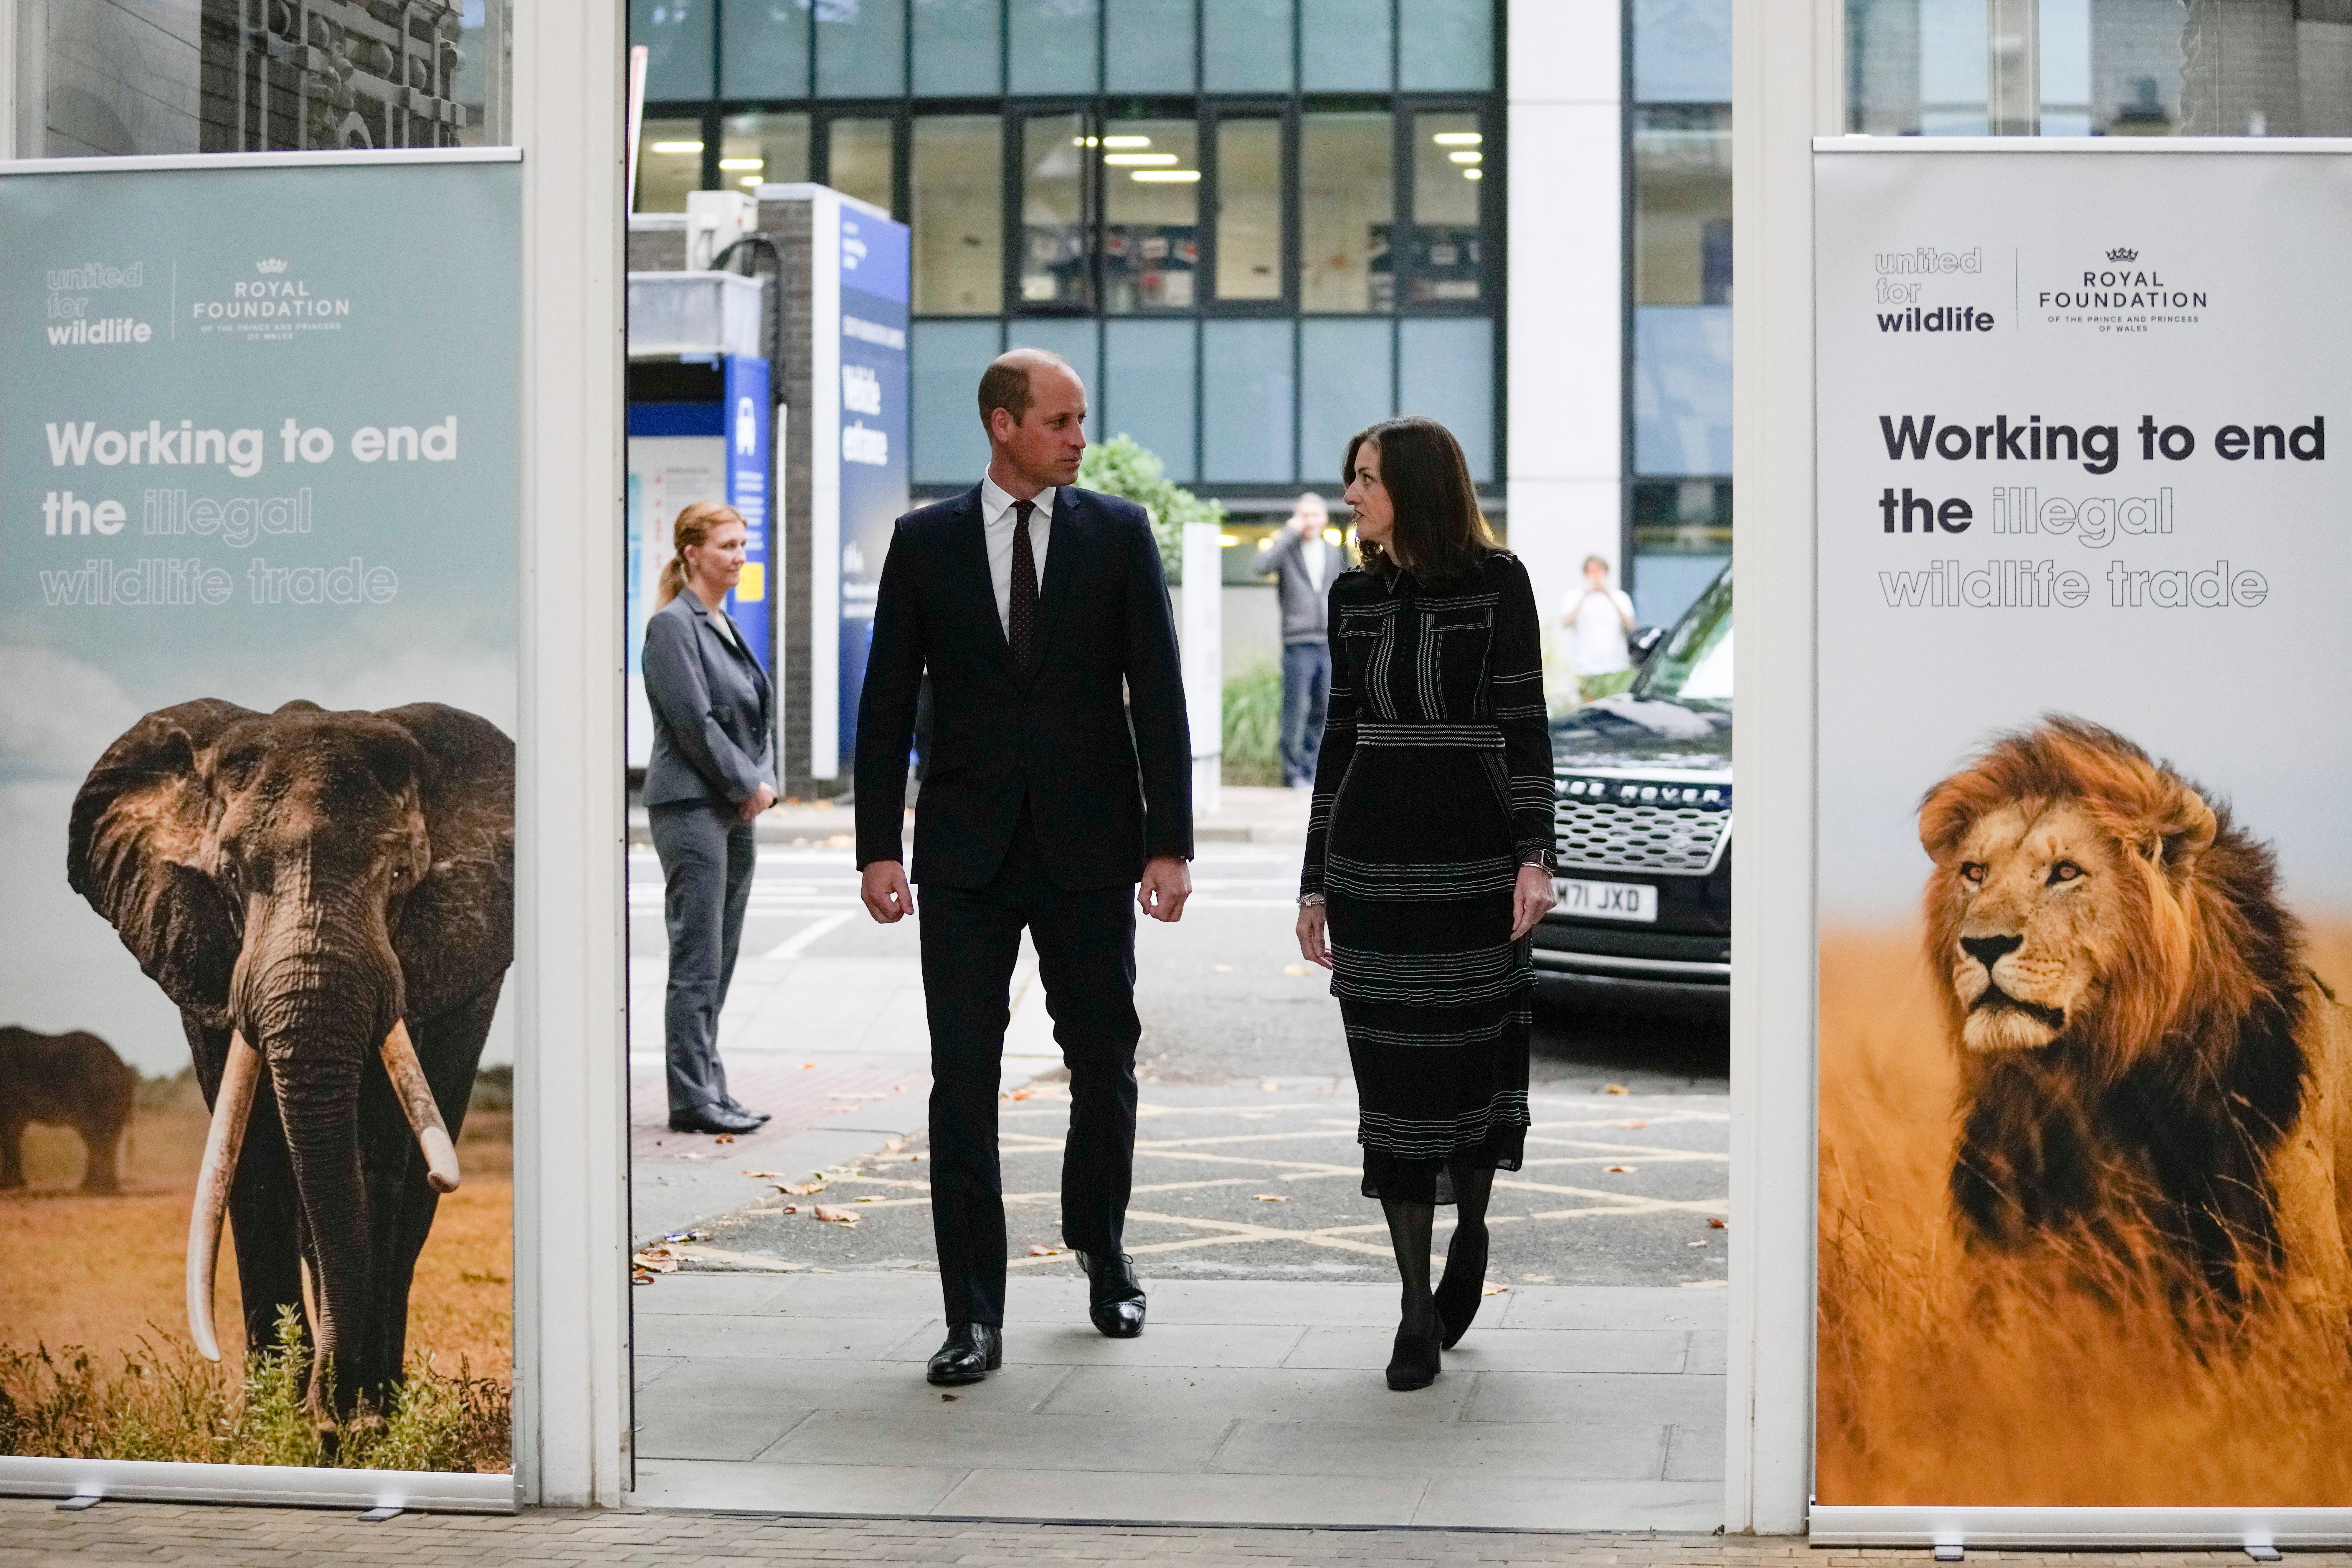 In August, William declared ‘we can defeat the illegal wildlife trade’